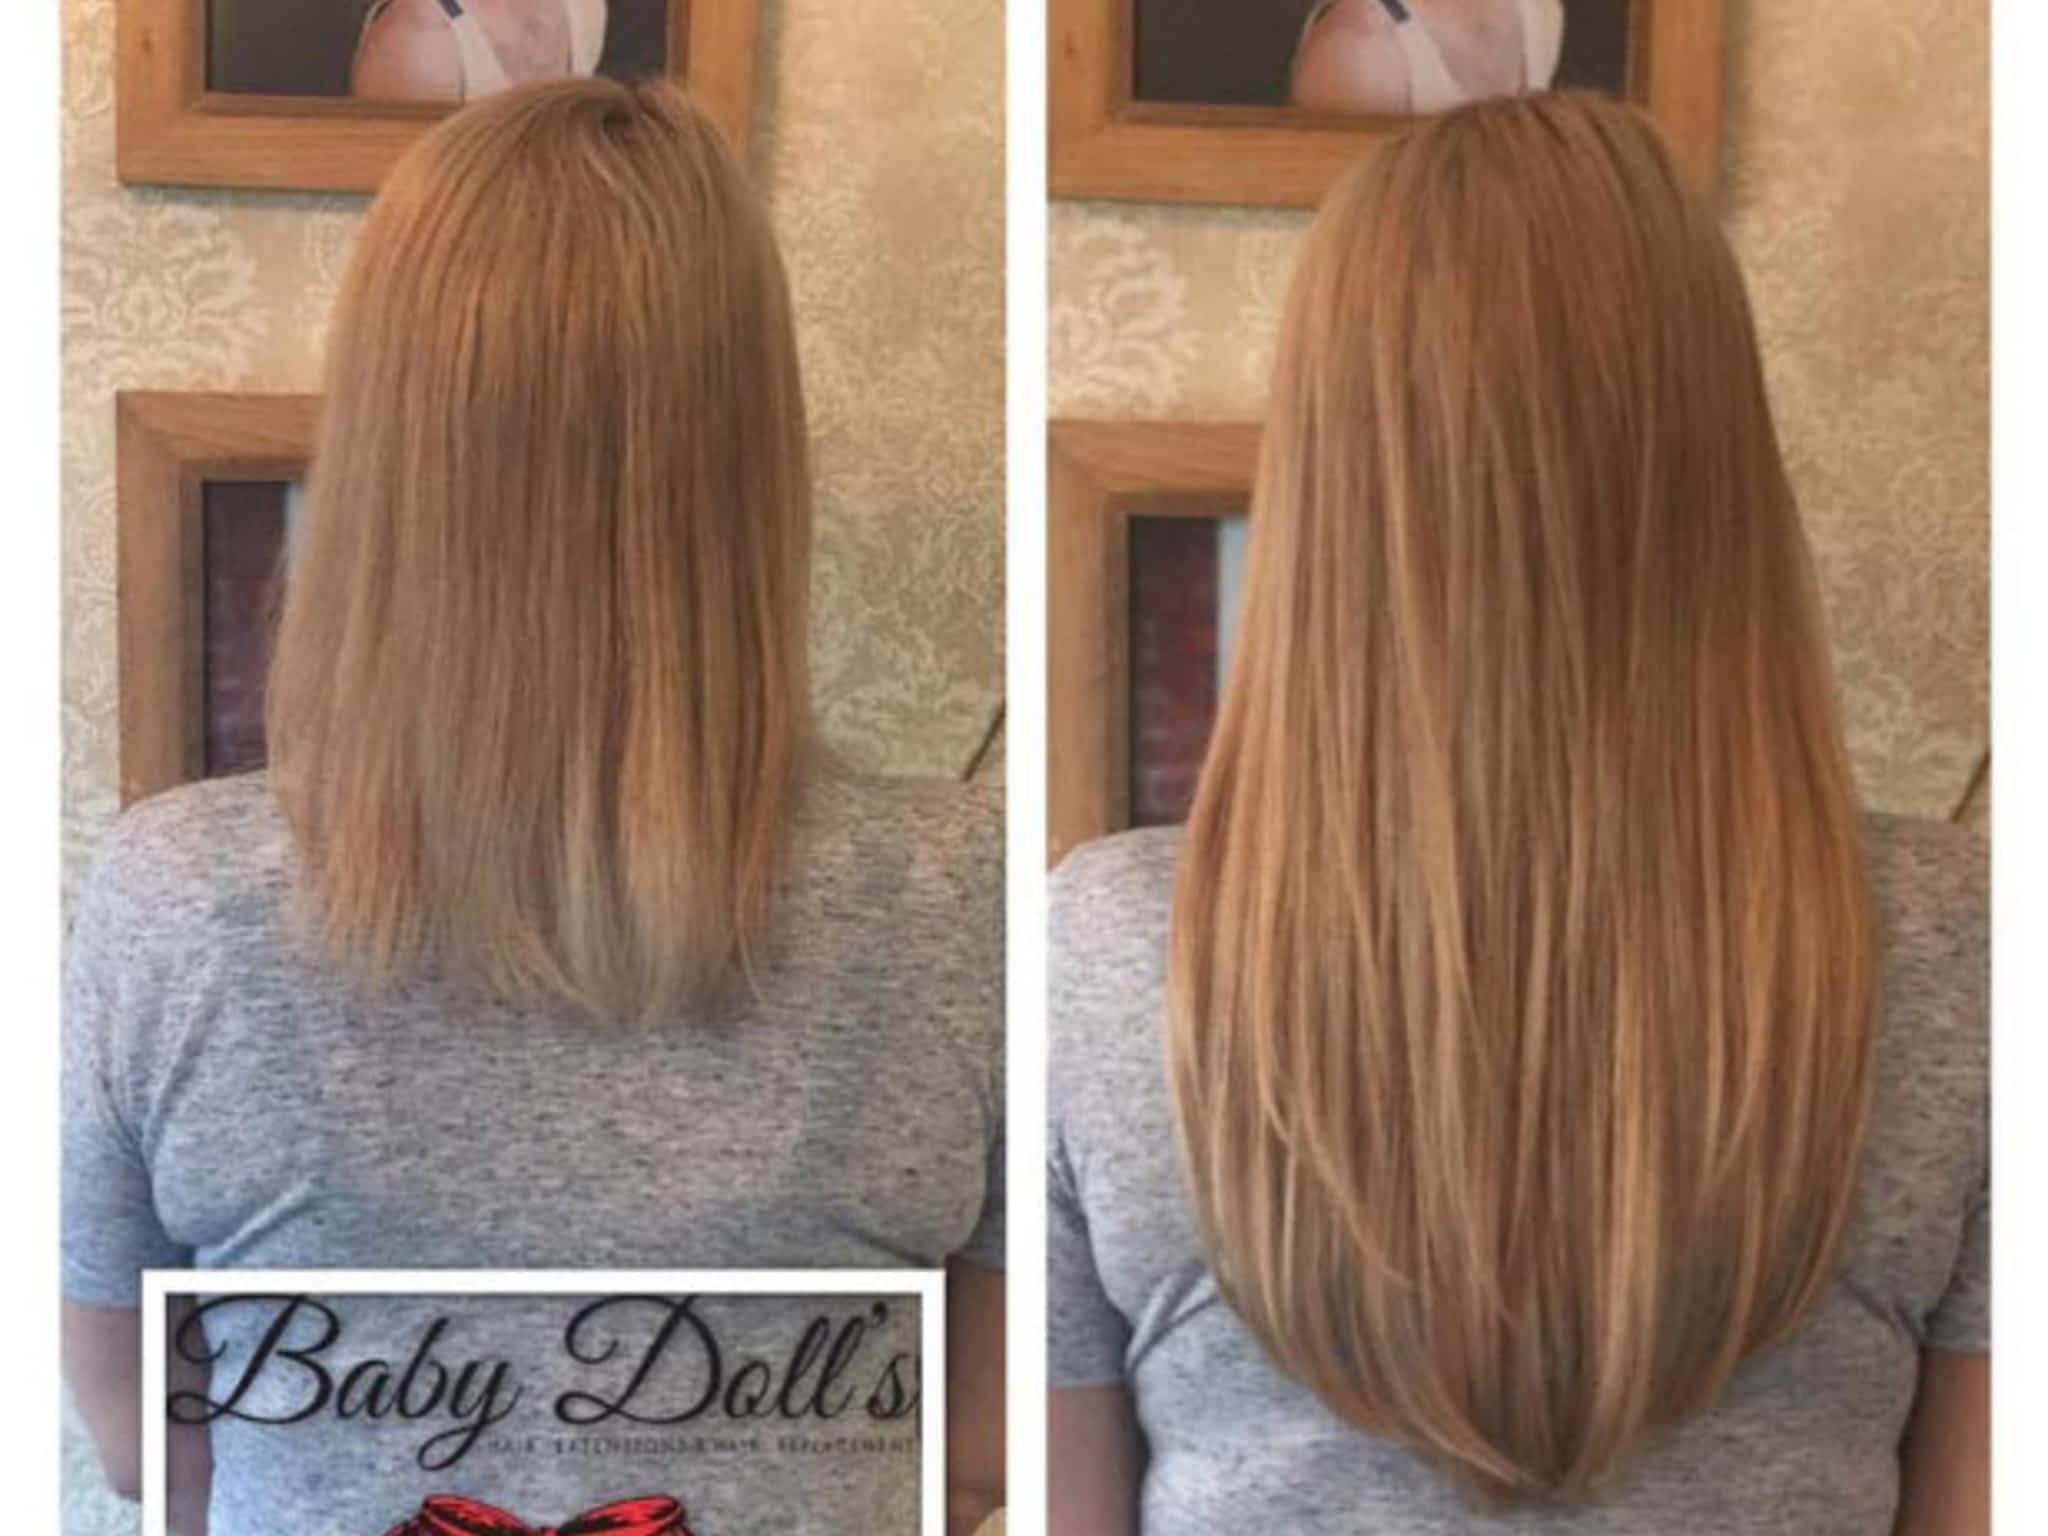 photo Baby Doll's Hair Extensions and Hair Reolacement Services